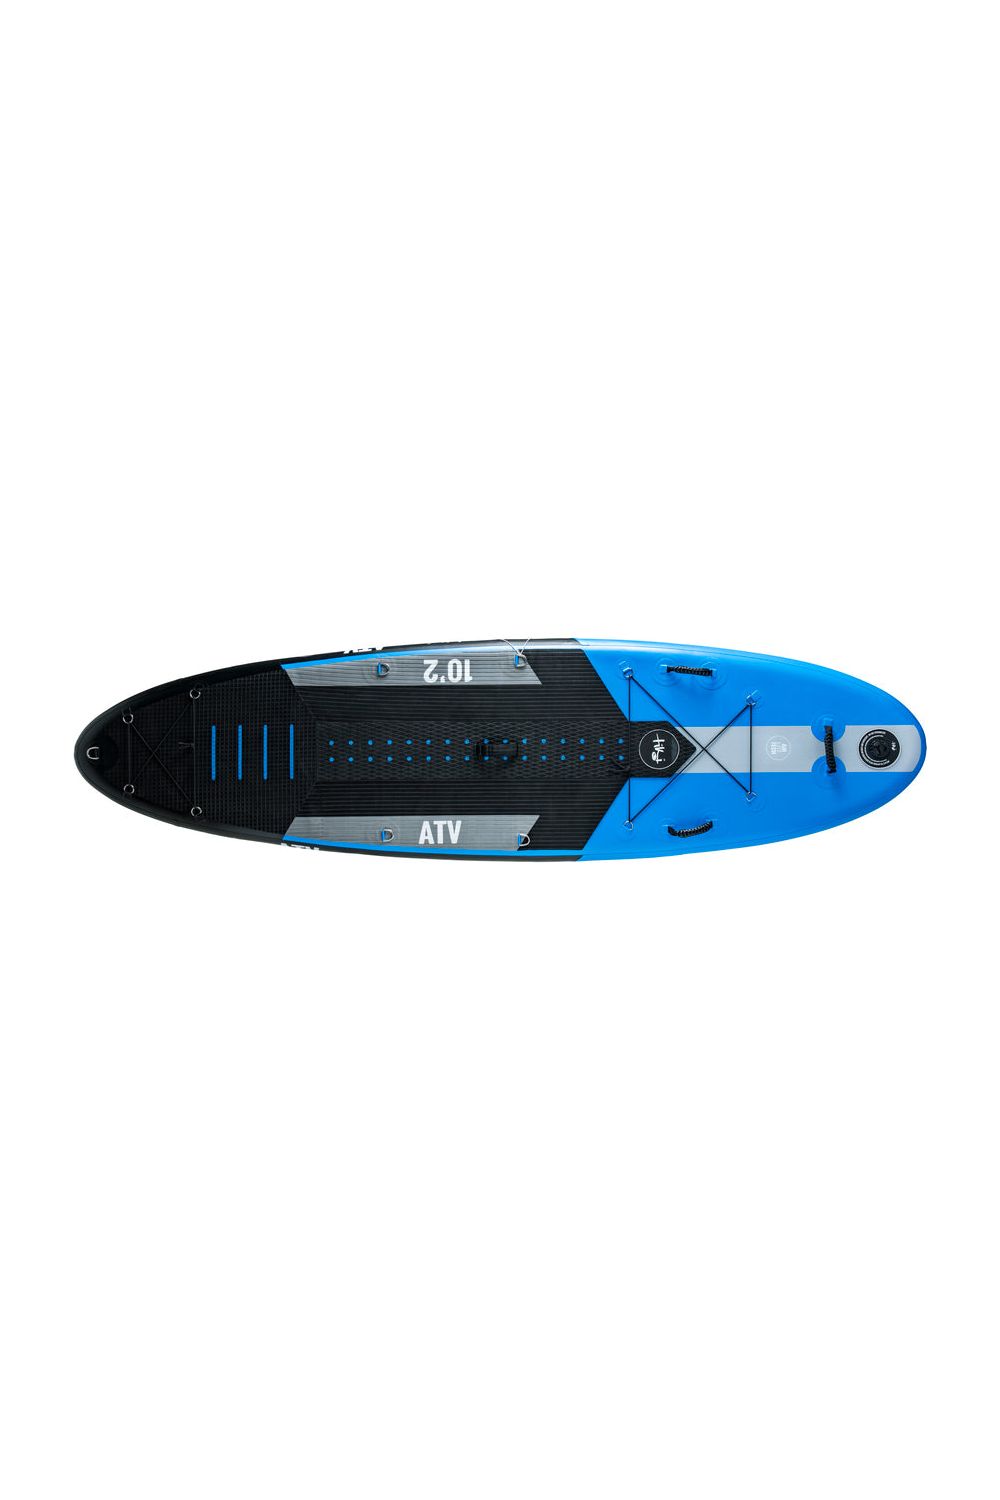 10'2 X 33" X 15Cm Tiki All Rounder Inflatable Sup Standard Pack (Incl Accessories)